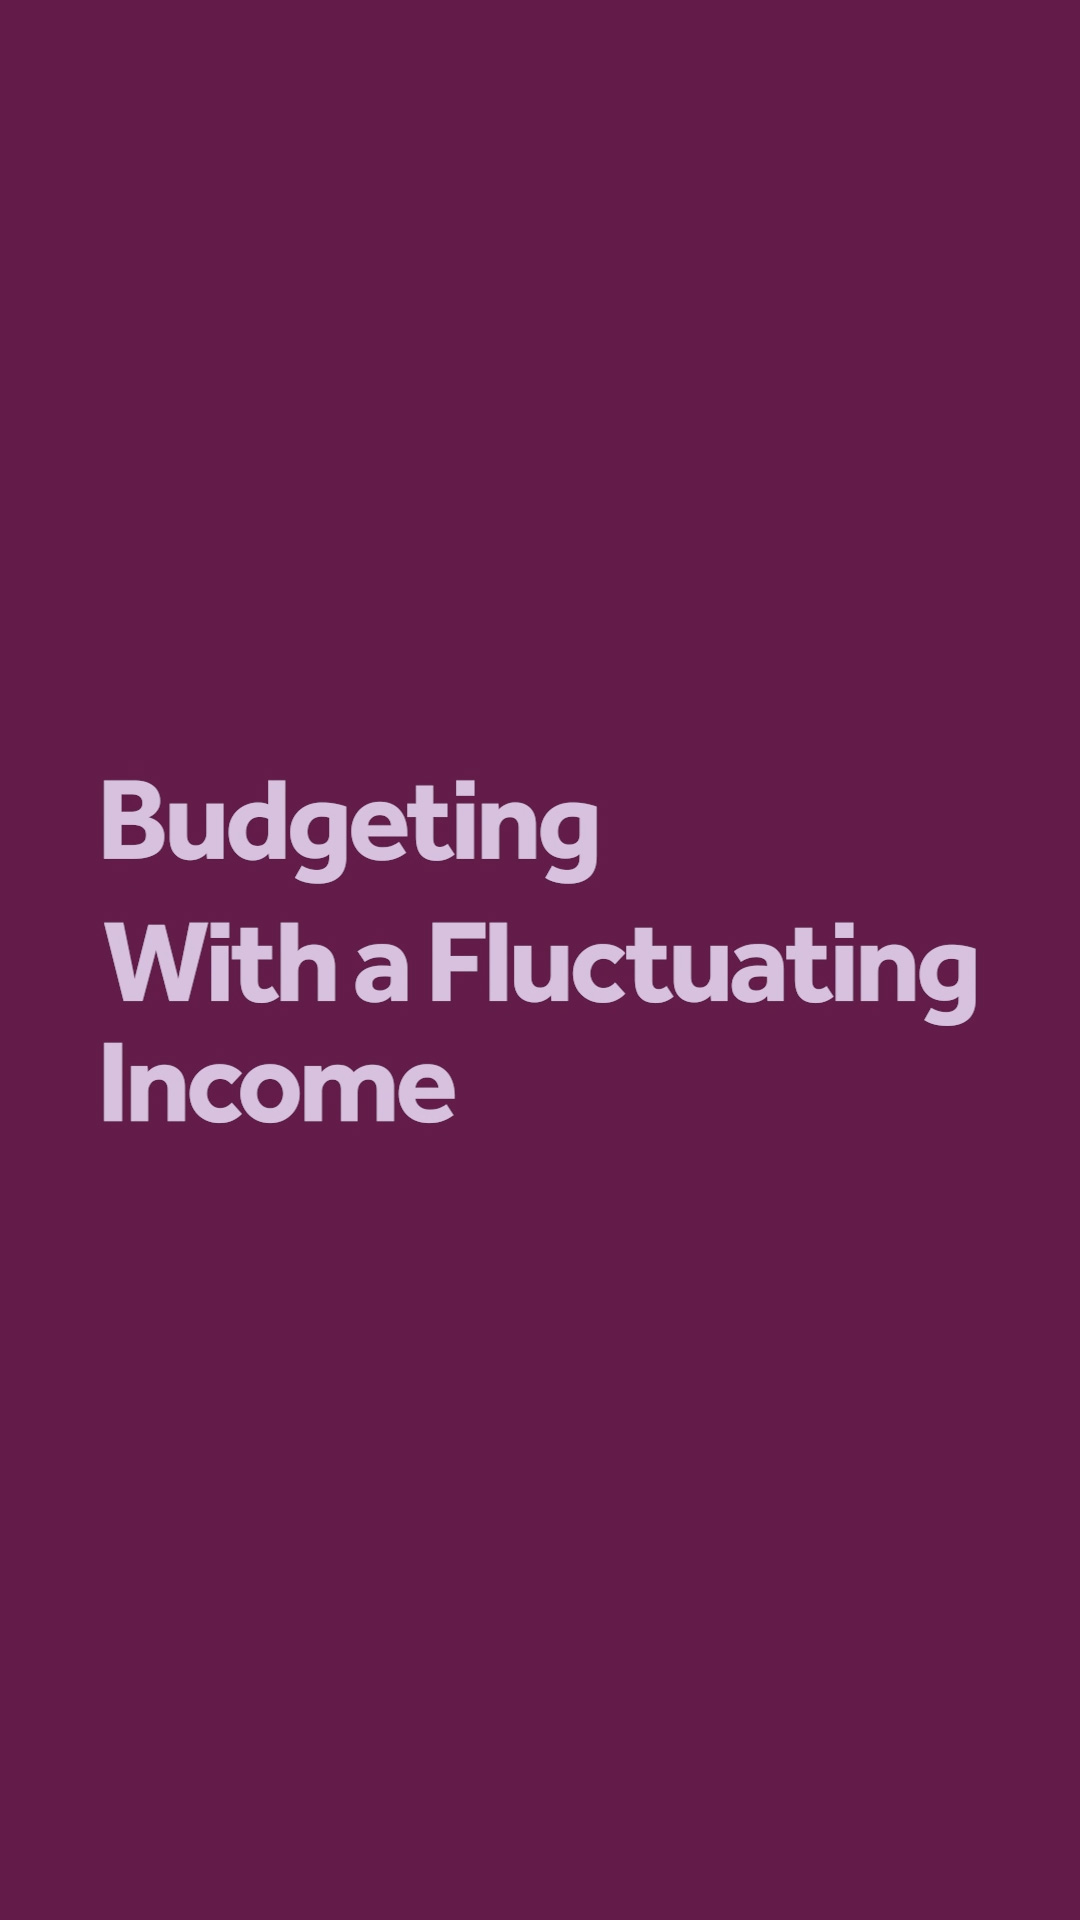 Barclays | Tania & Luke | Budgeting with a Fluctuating Income | 9x16 | 15